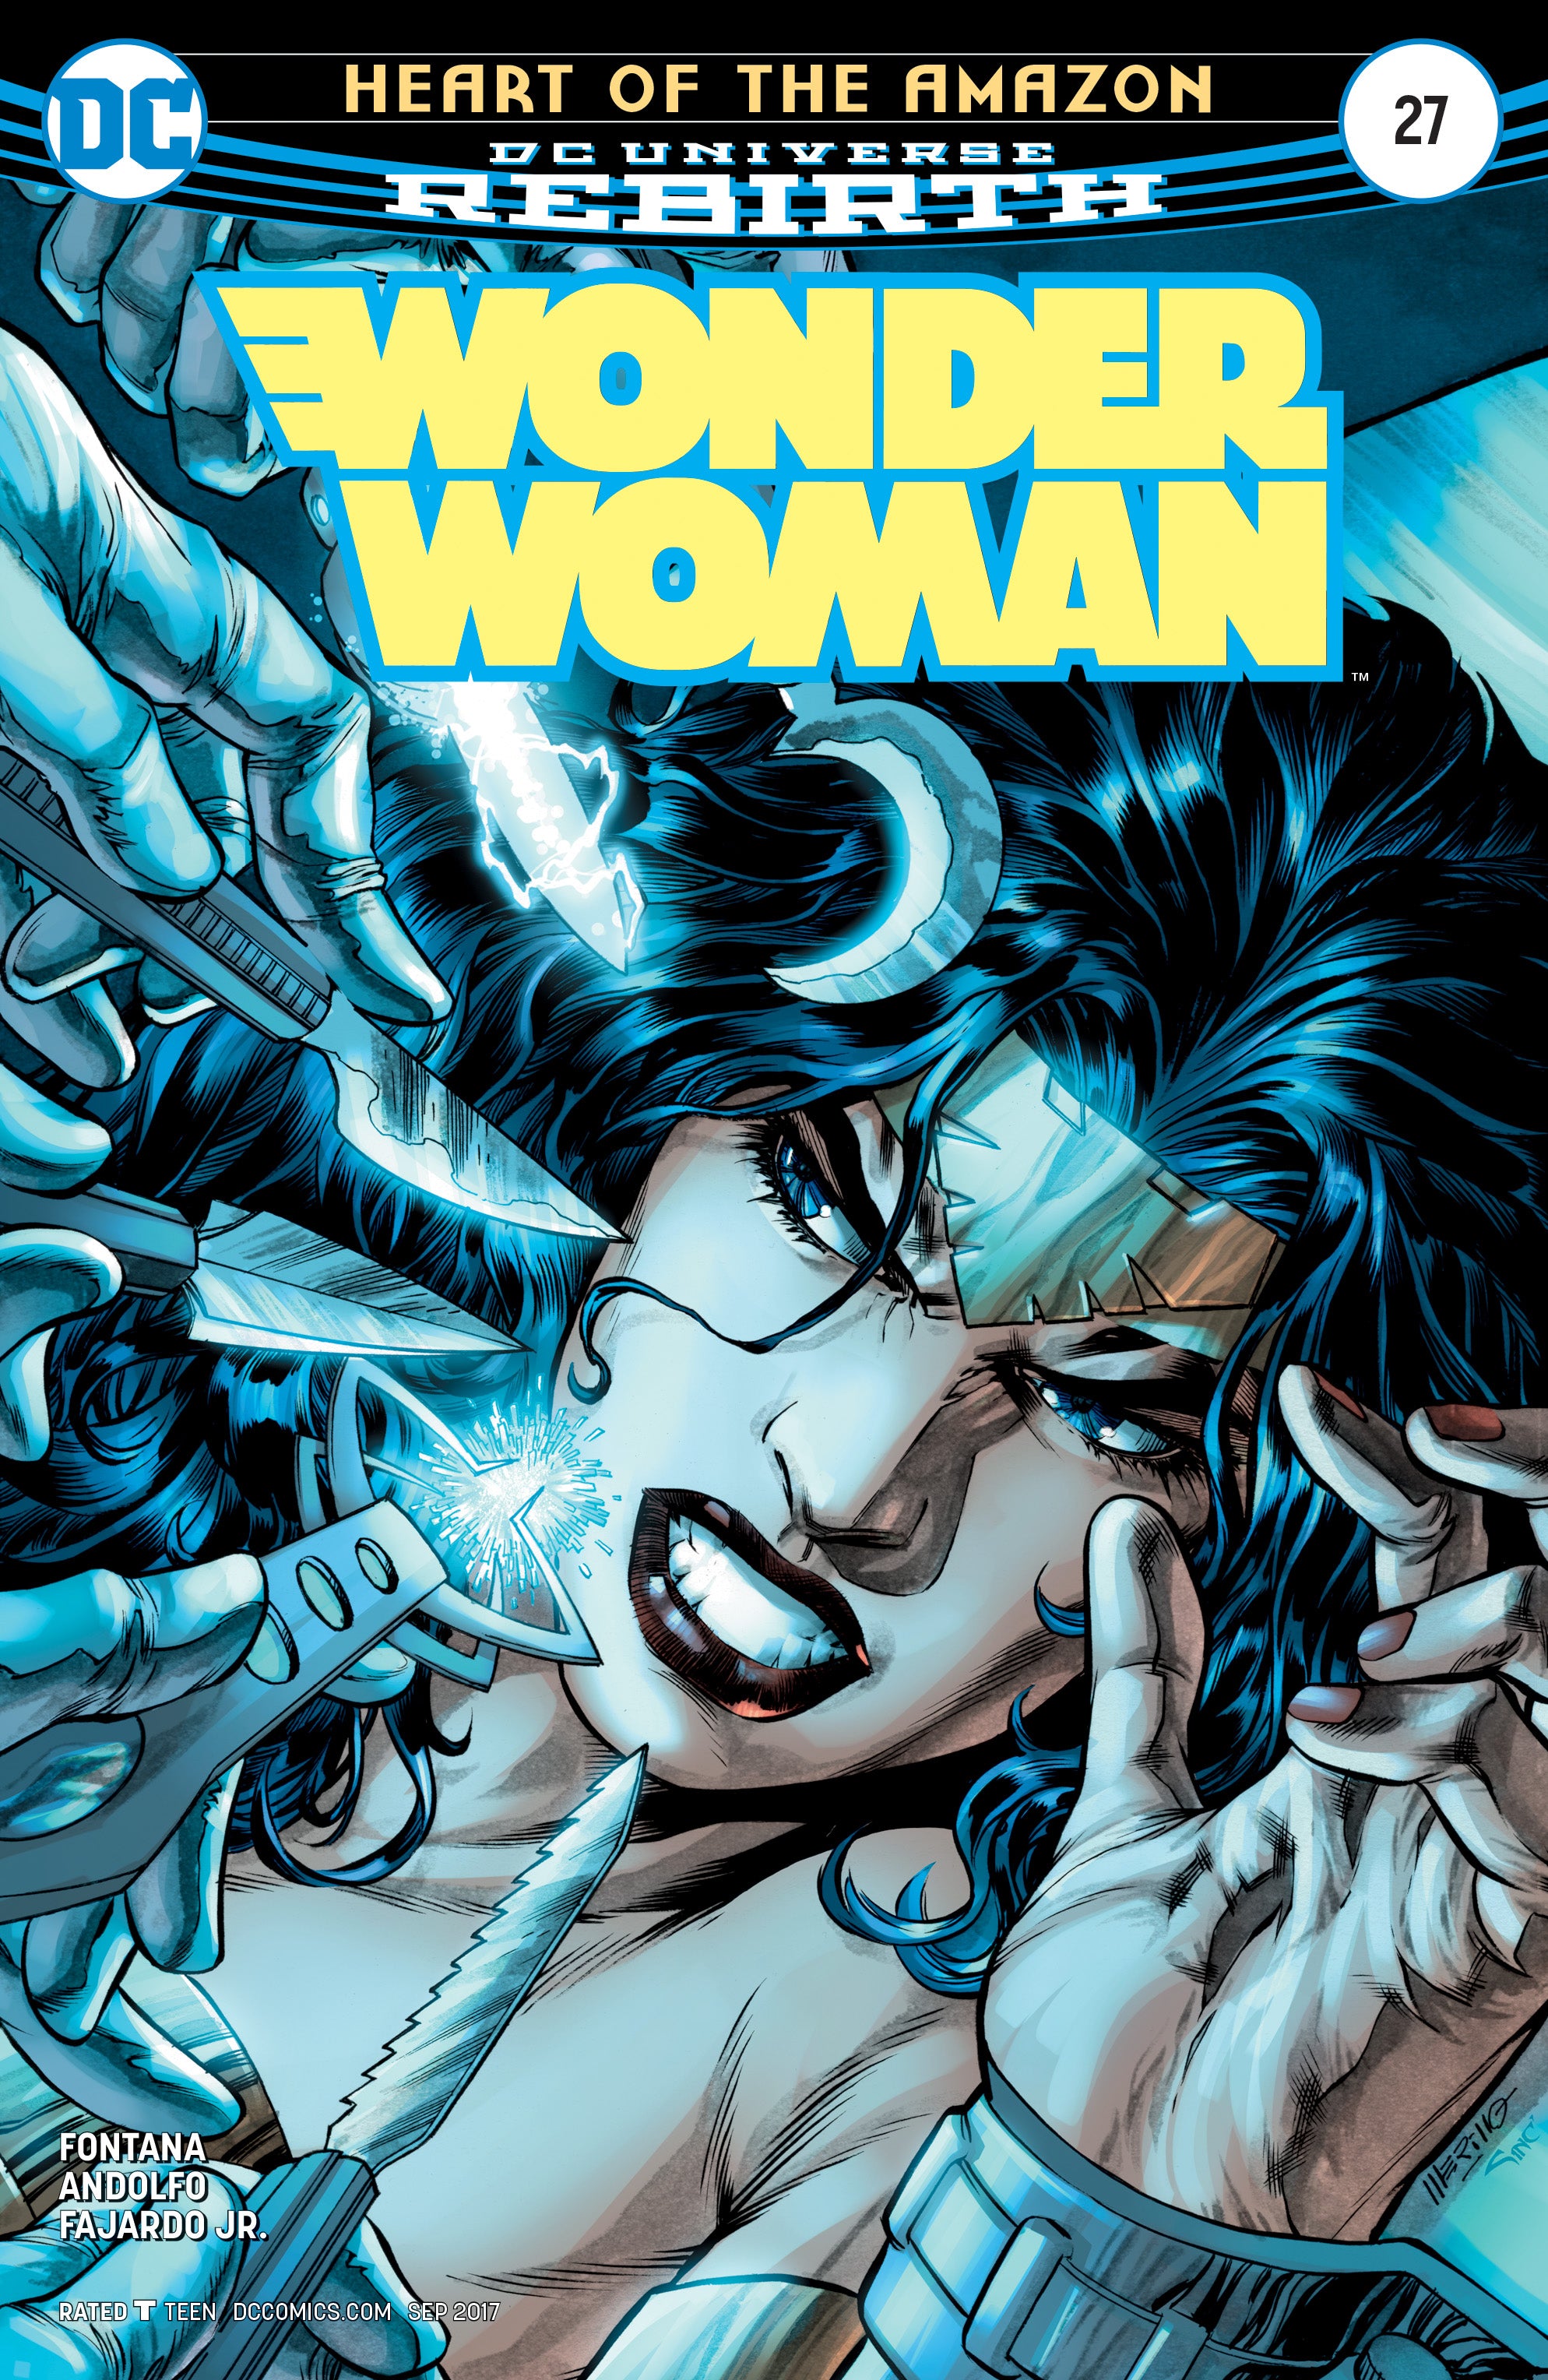 WONDER WOMAN #27 | Game Master's Emporium (The New GME)